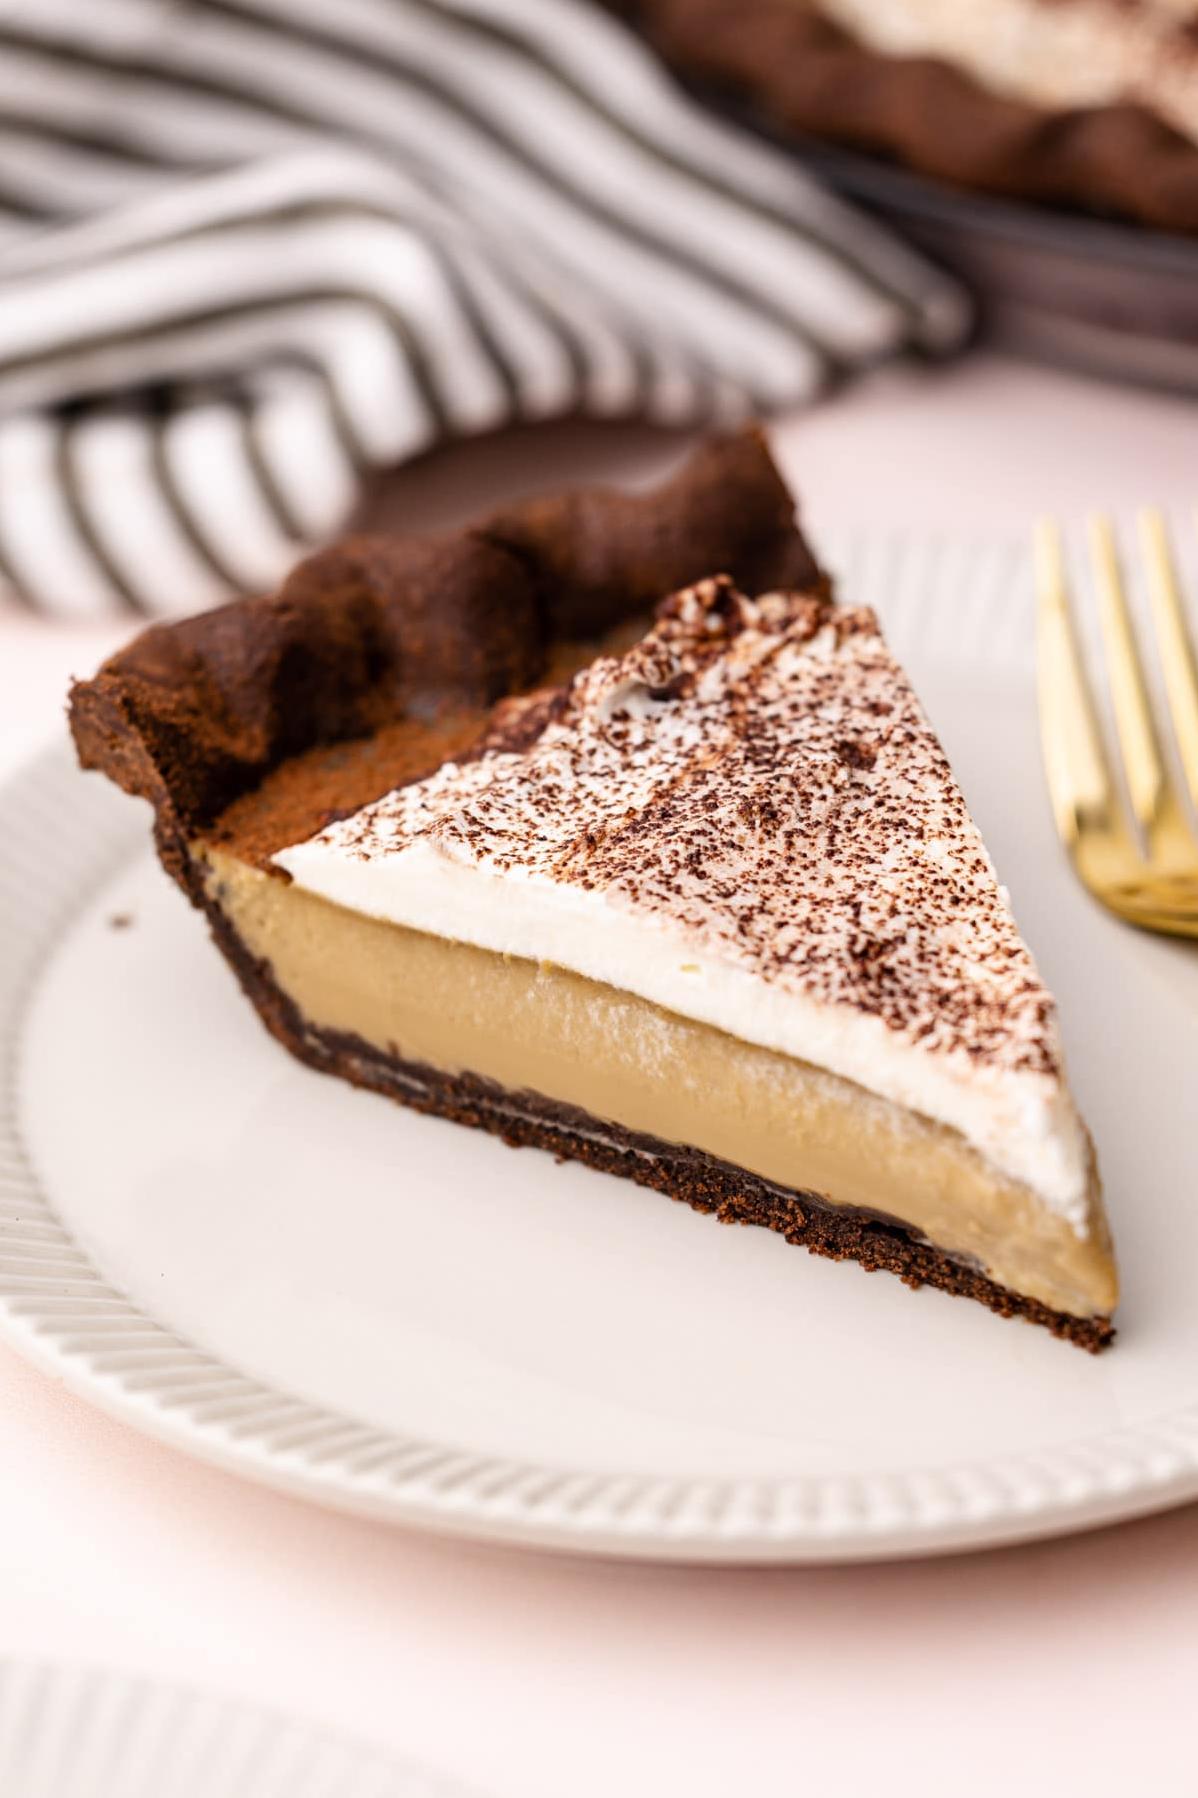  This pie is a coffee lover's paradise.